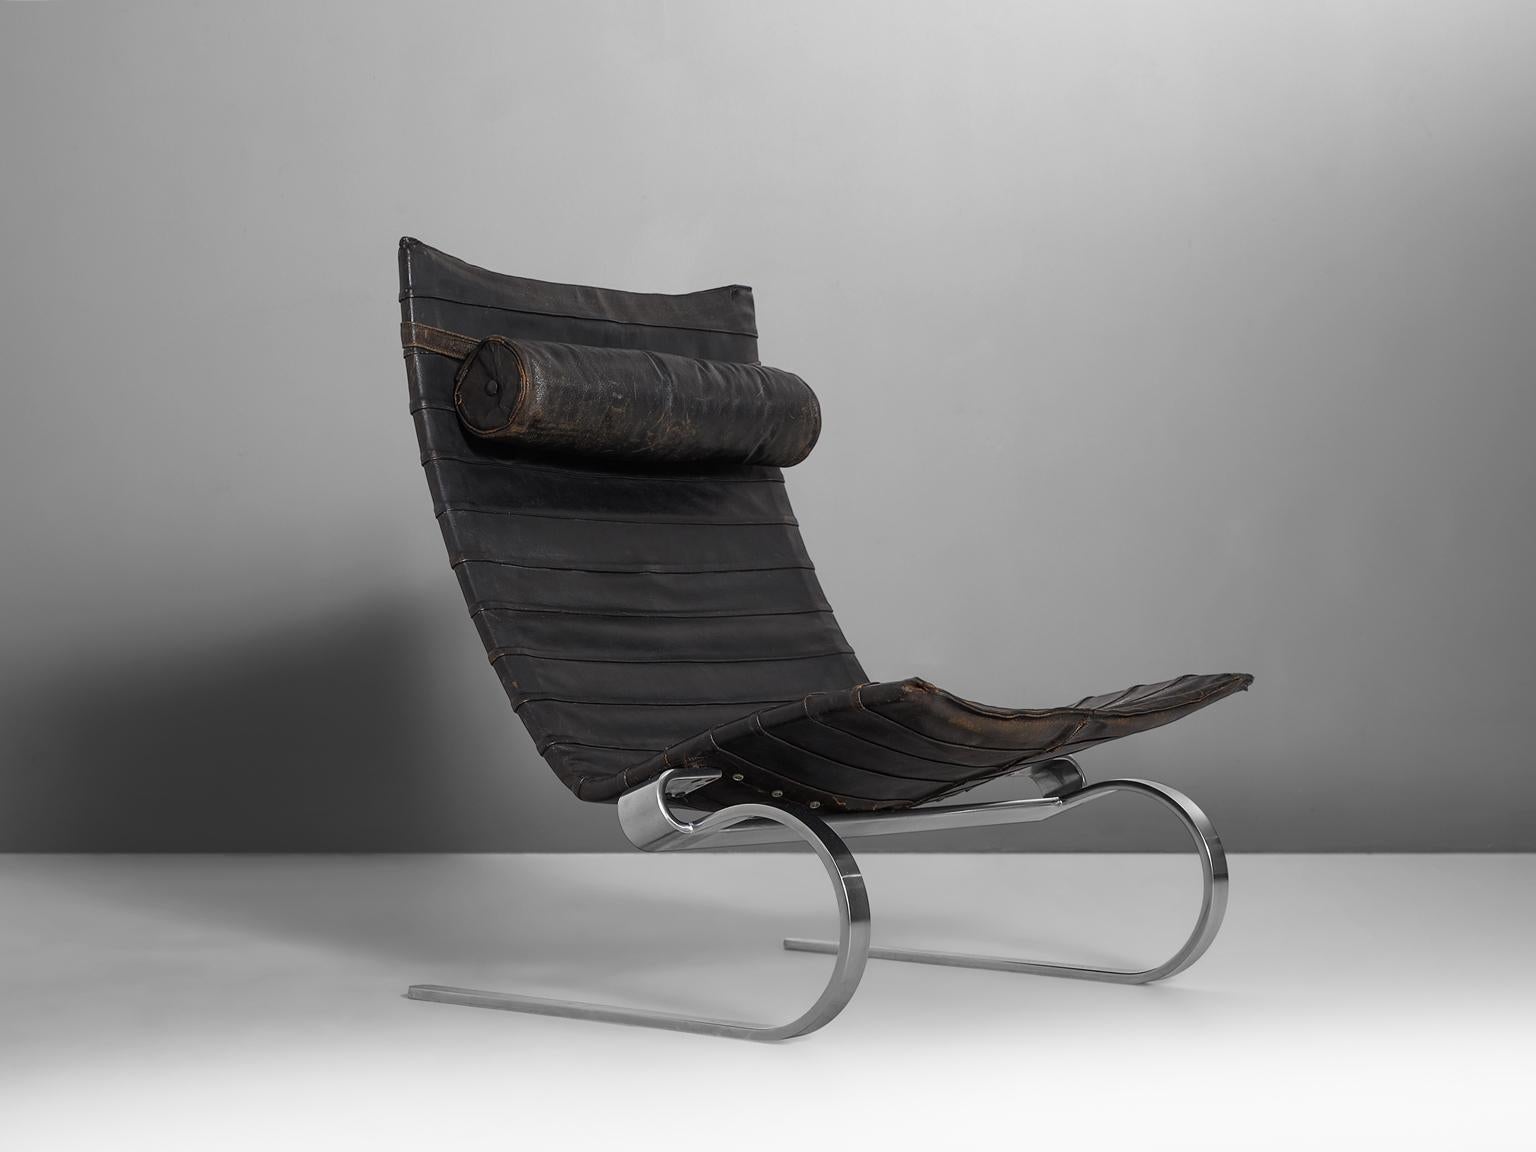 Poul Kjærholm for E. Kold Christensen, Lounge chair PK20, in stainless steel and leather, Denmark, 1967.

Cantilevered easy chair designed by Poul Kjærholm for E. Kold Christensen. This eye-catching chair is made of matte, chrome-plated spring steel